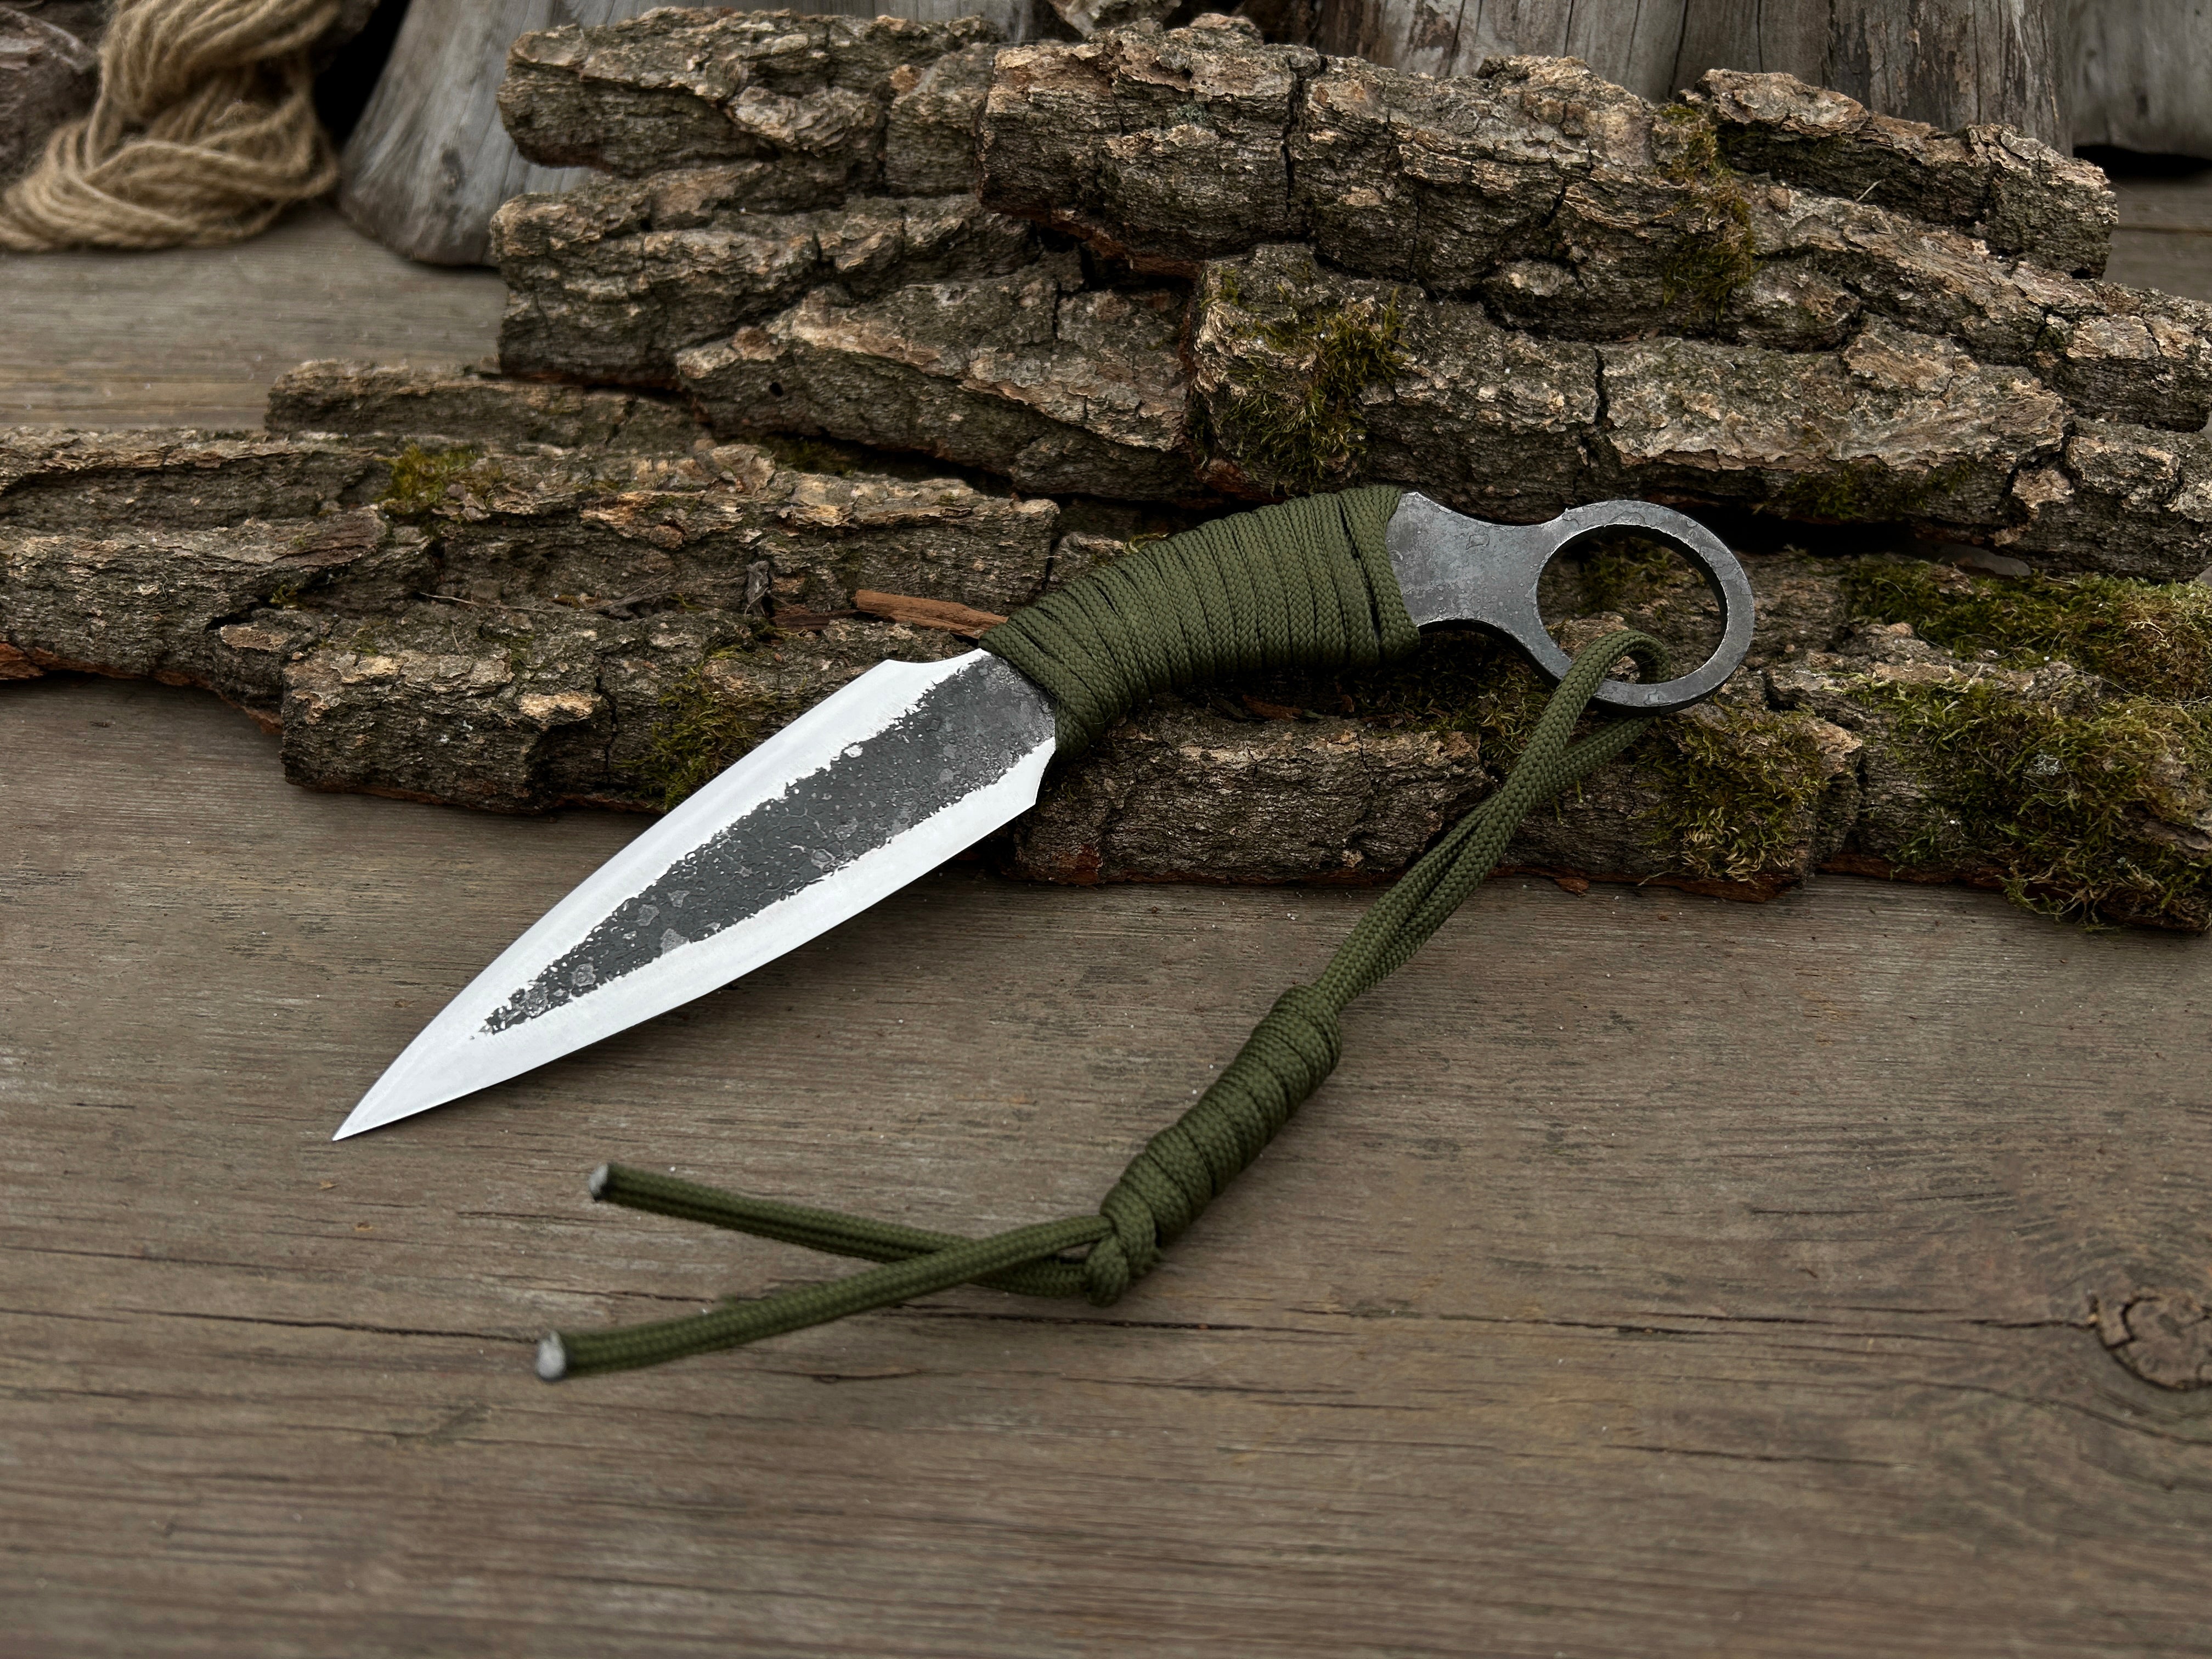 Hand-Forged Throwing Knife, Total Length - 19.5 cm (7.6 inches)